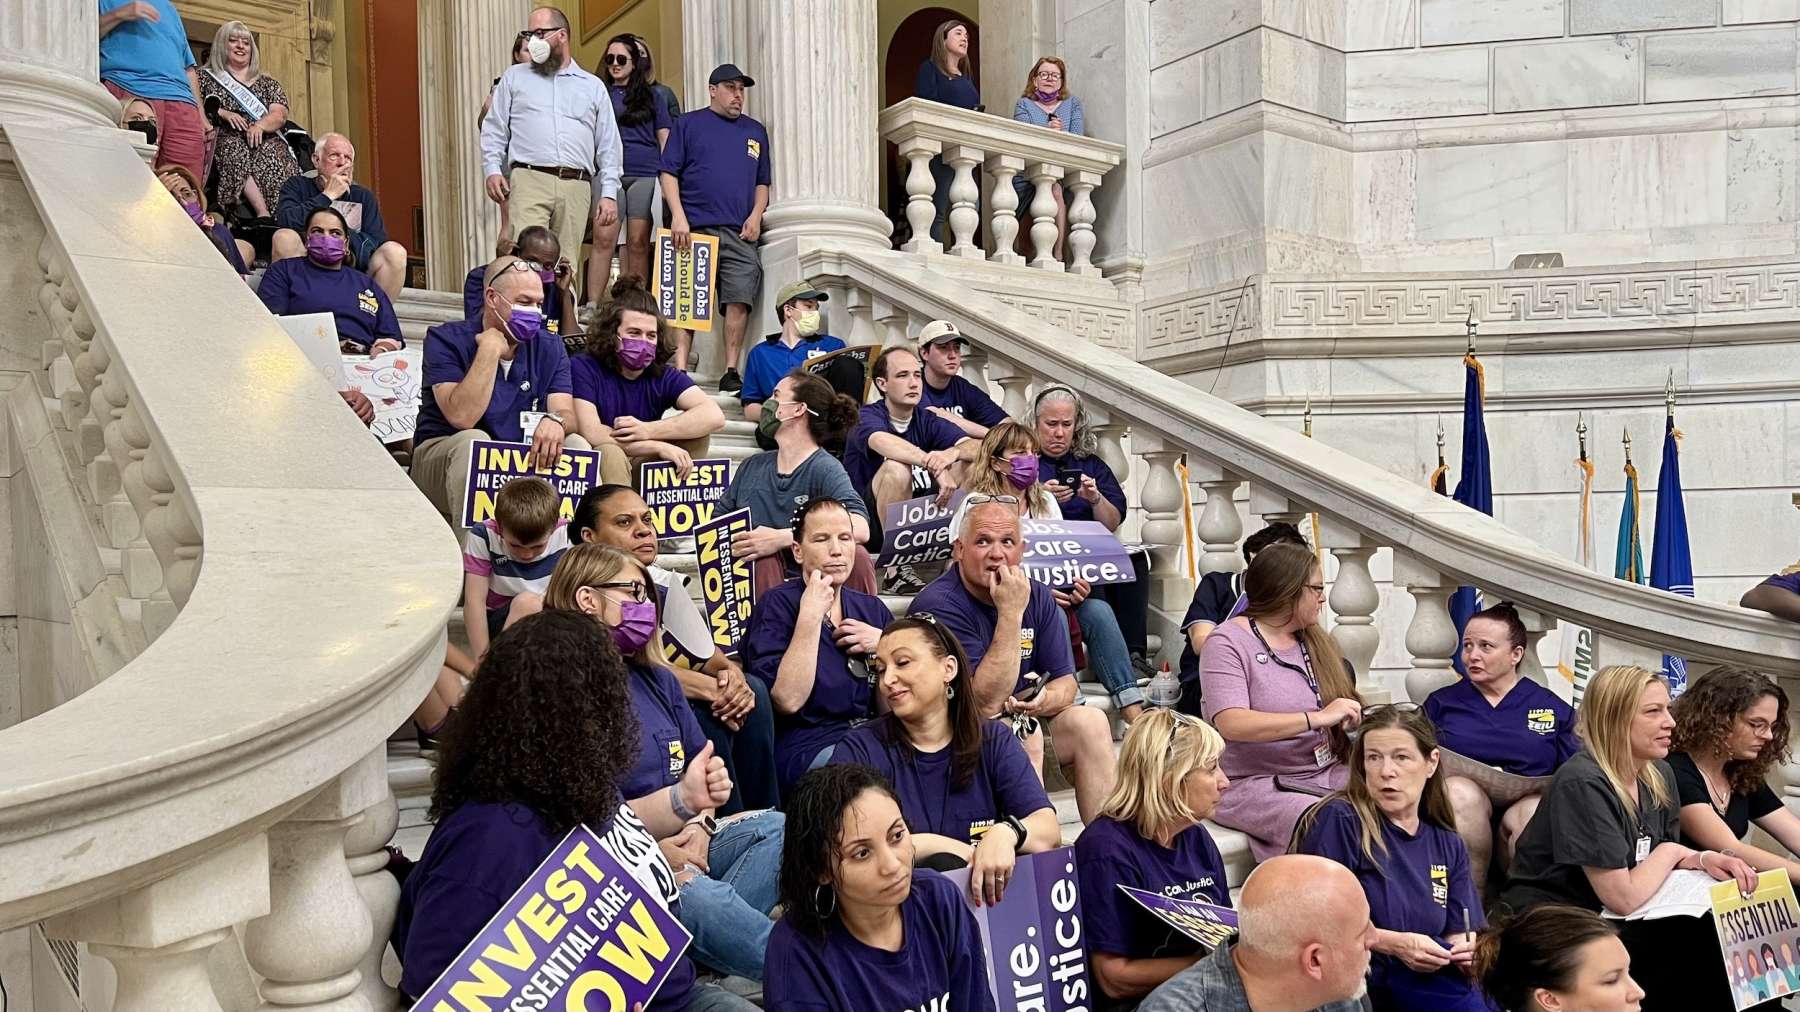 Rhode Island News: Essential healthcare workers hold State House rally to demand investment now, not later